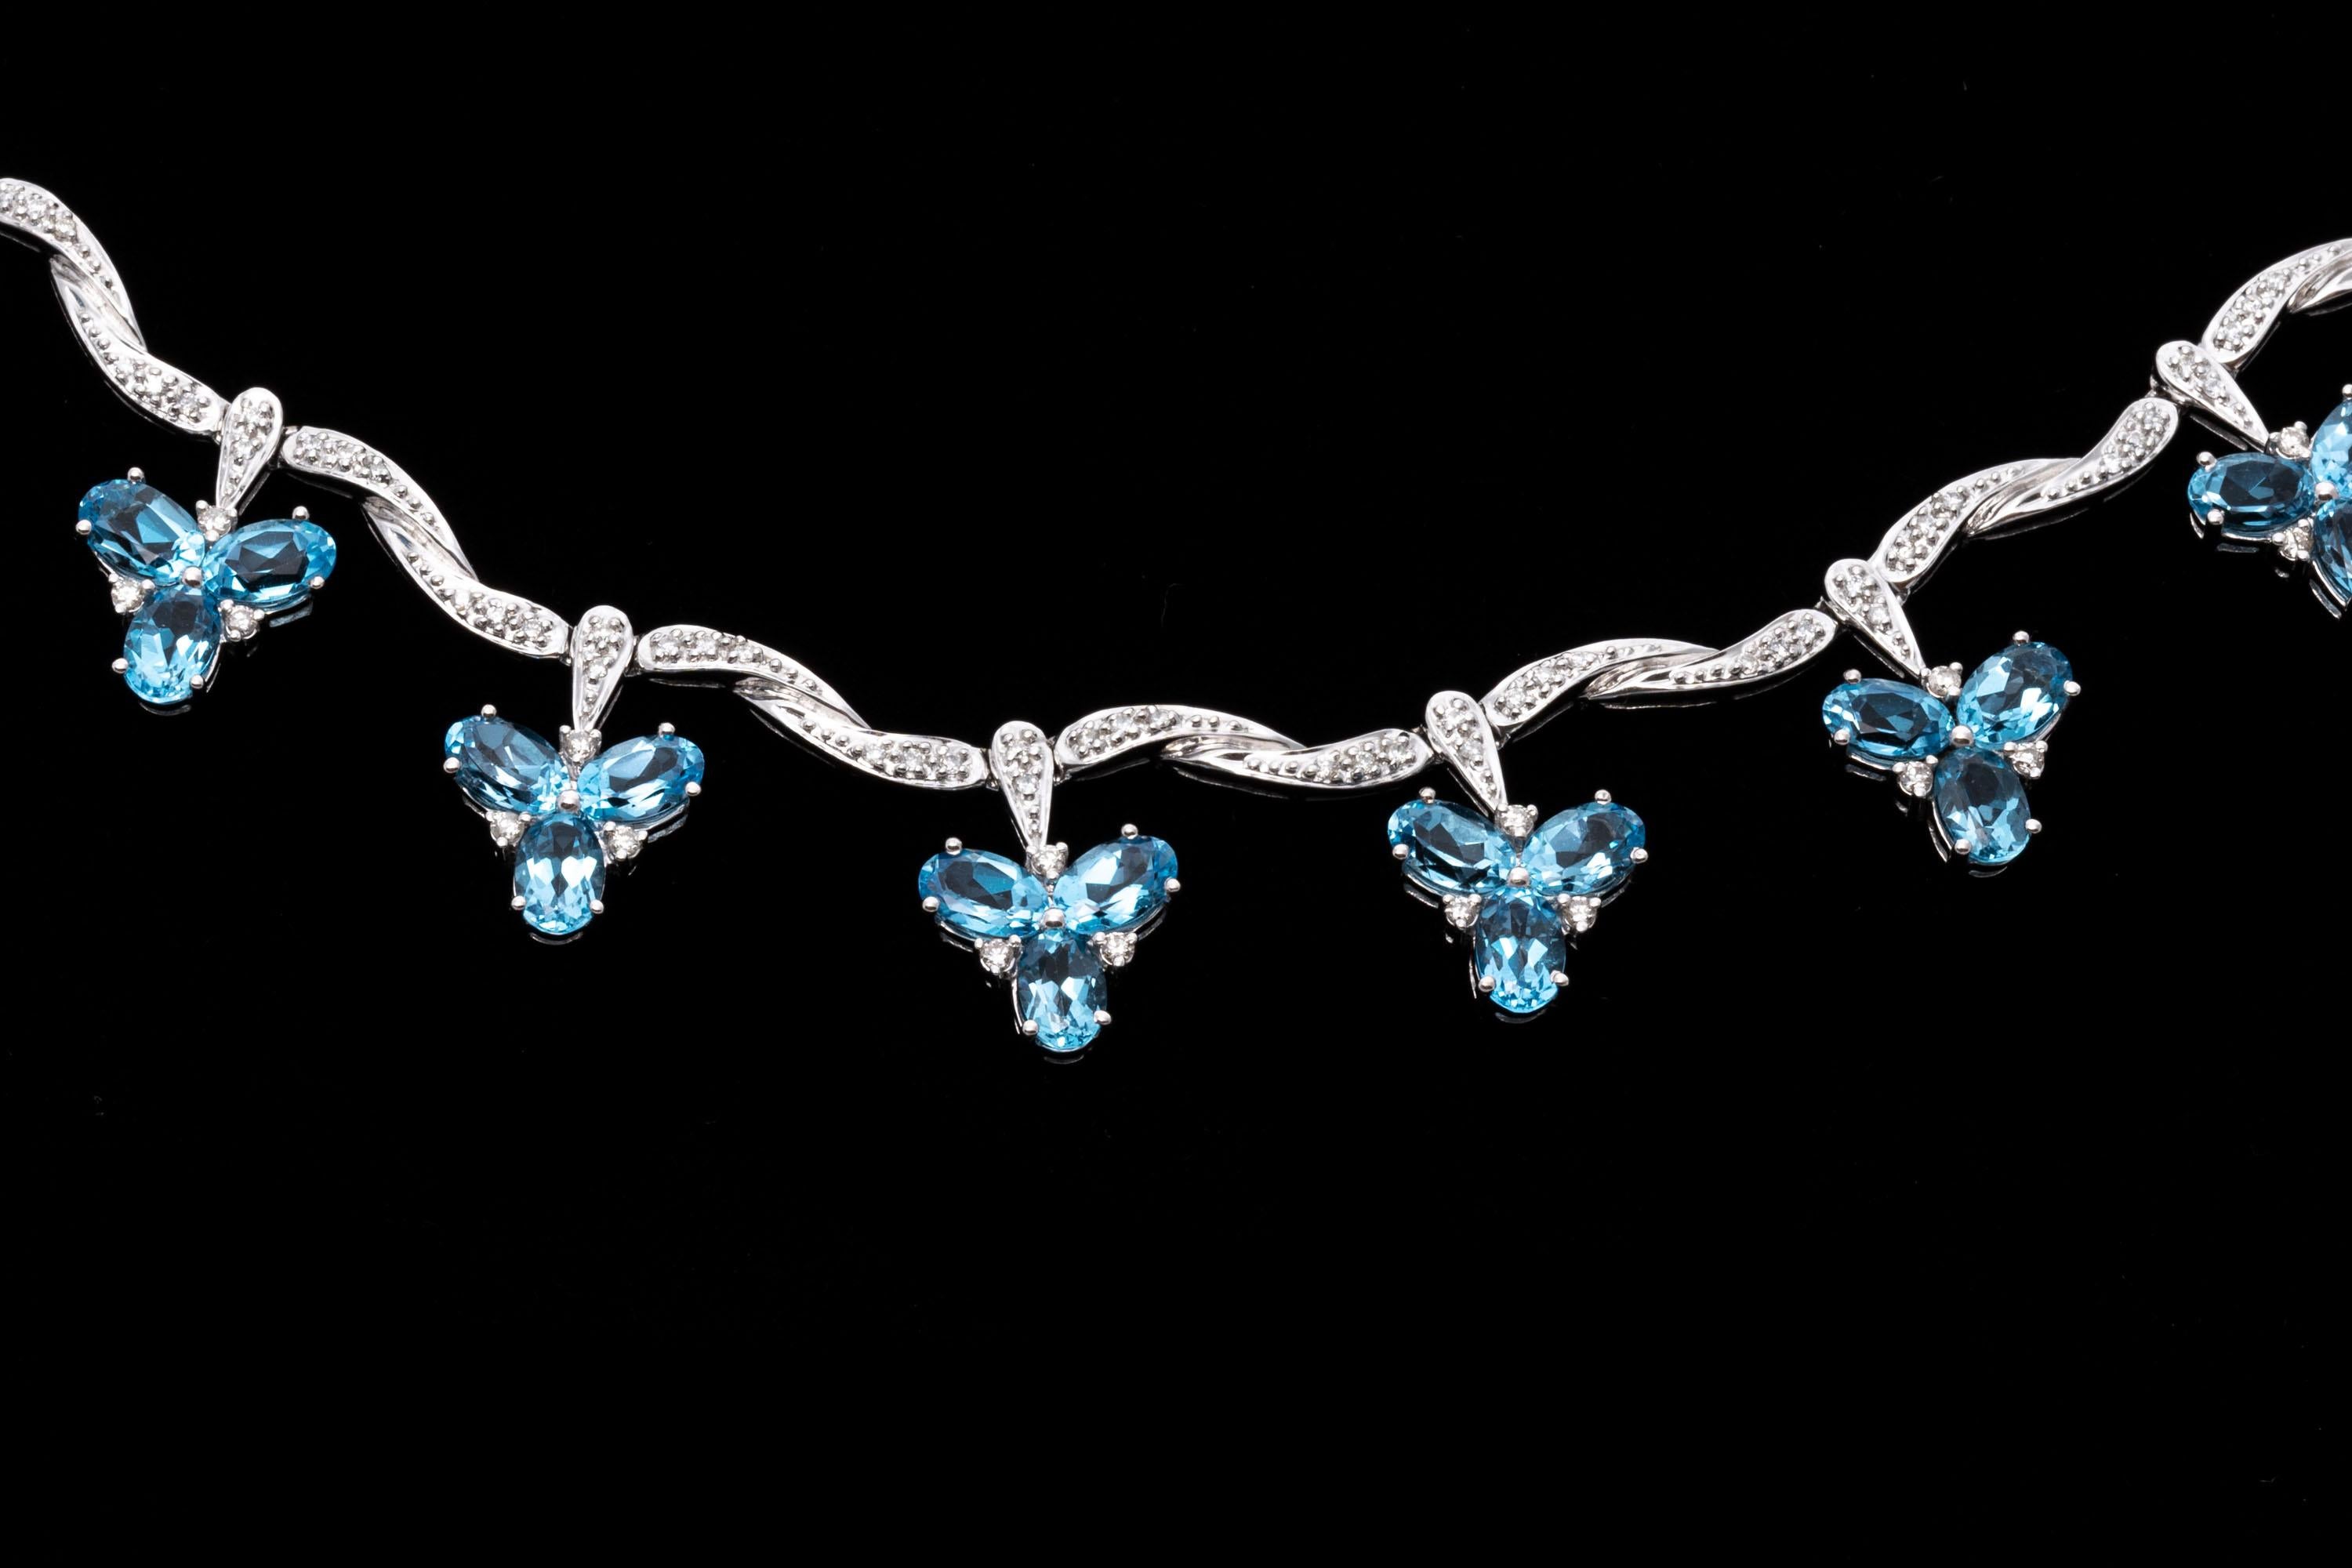 This interesting necklace is crafted of 14K white gold and presents an elegant design. Twist style links with diamonds support small charms set at intervals over the front of the necklace. These charms are set with small clusters of oval cut topaz